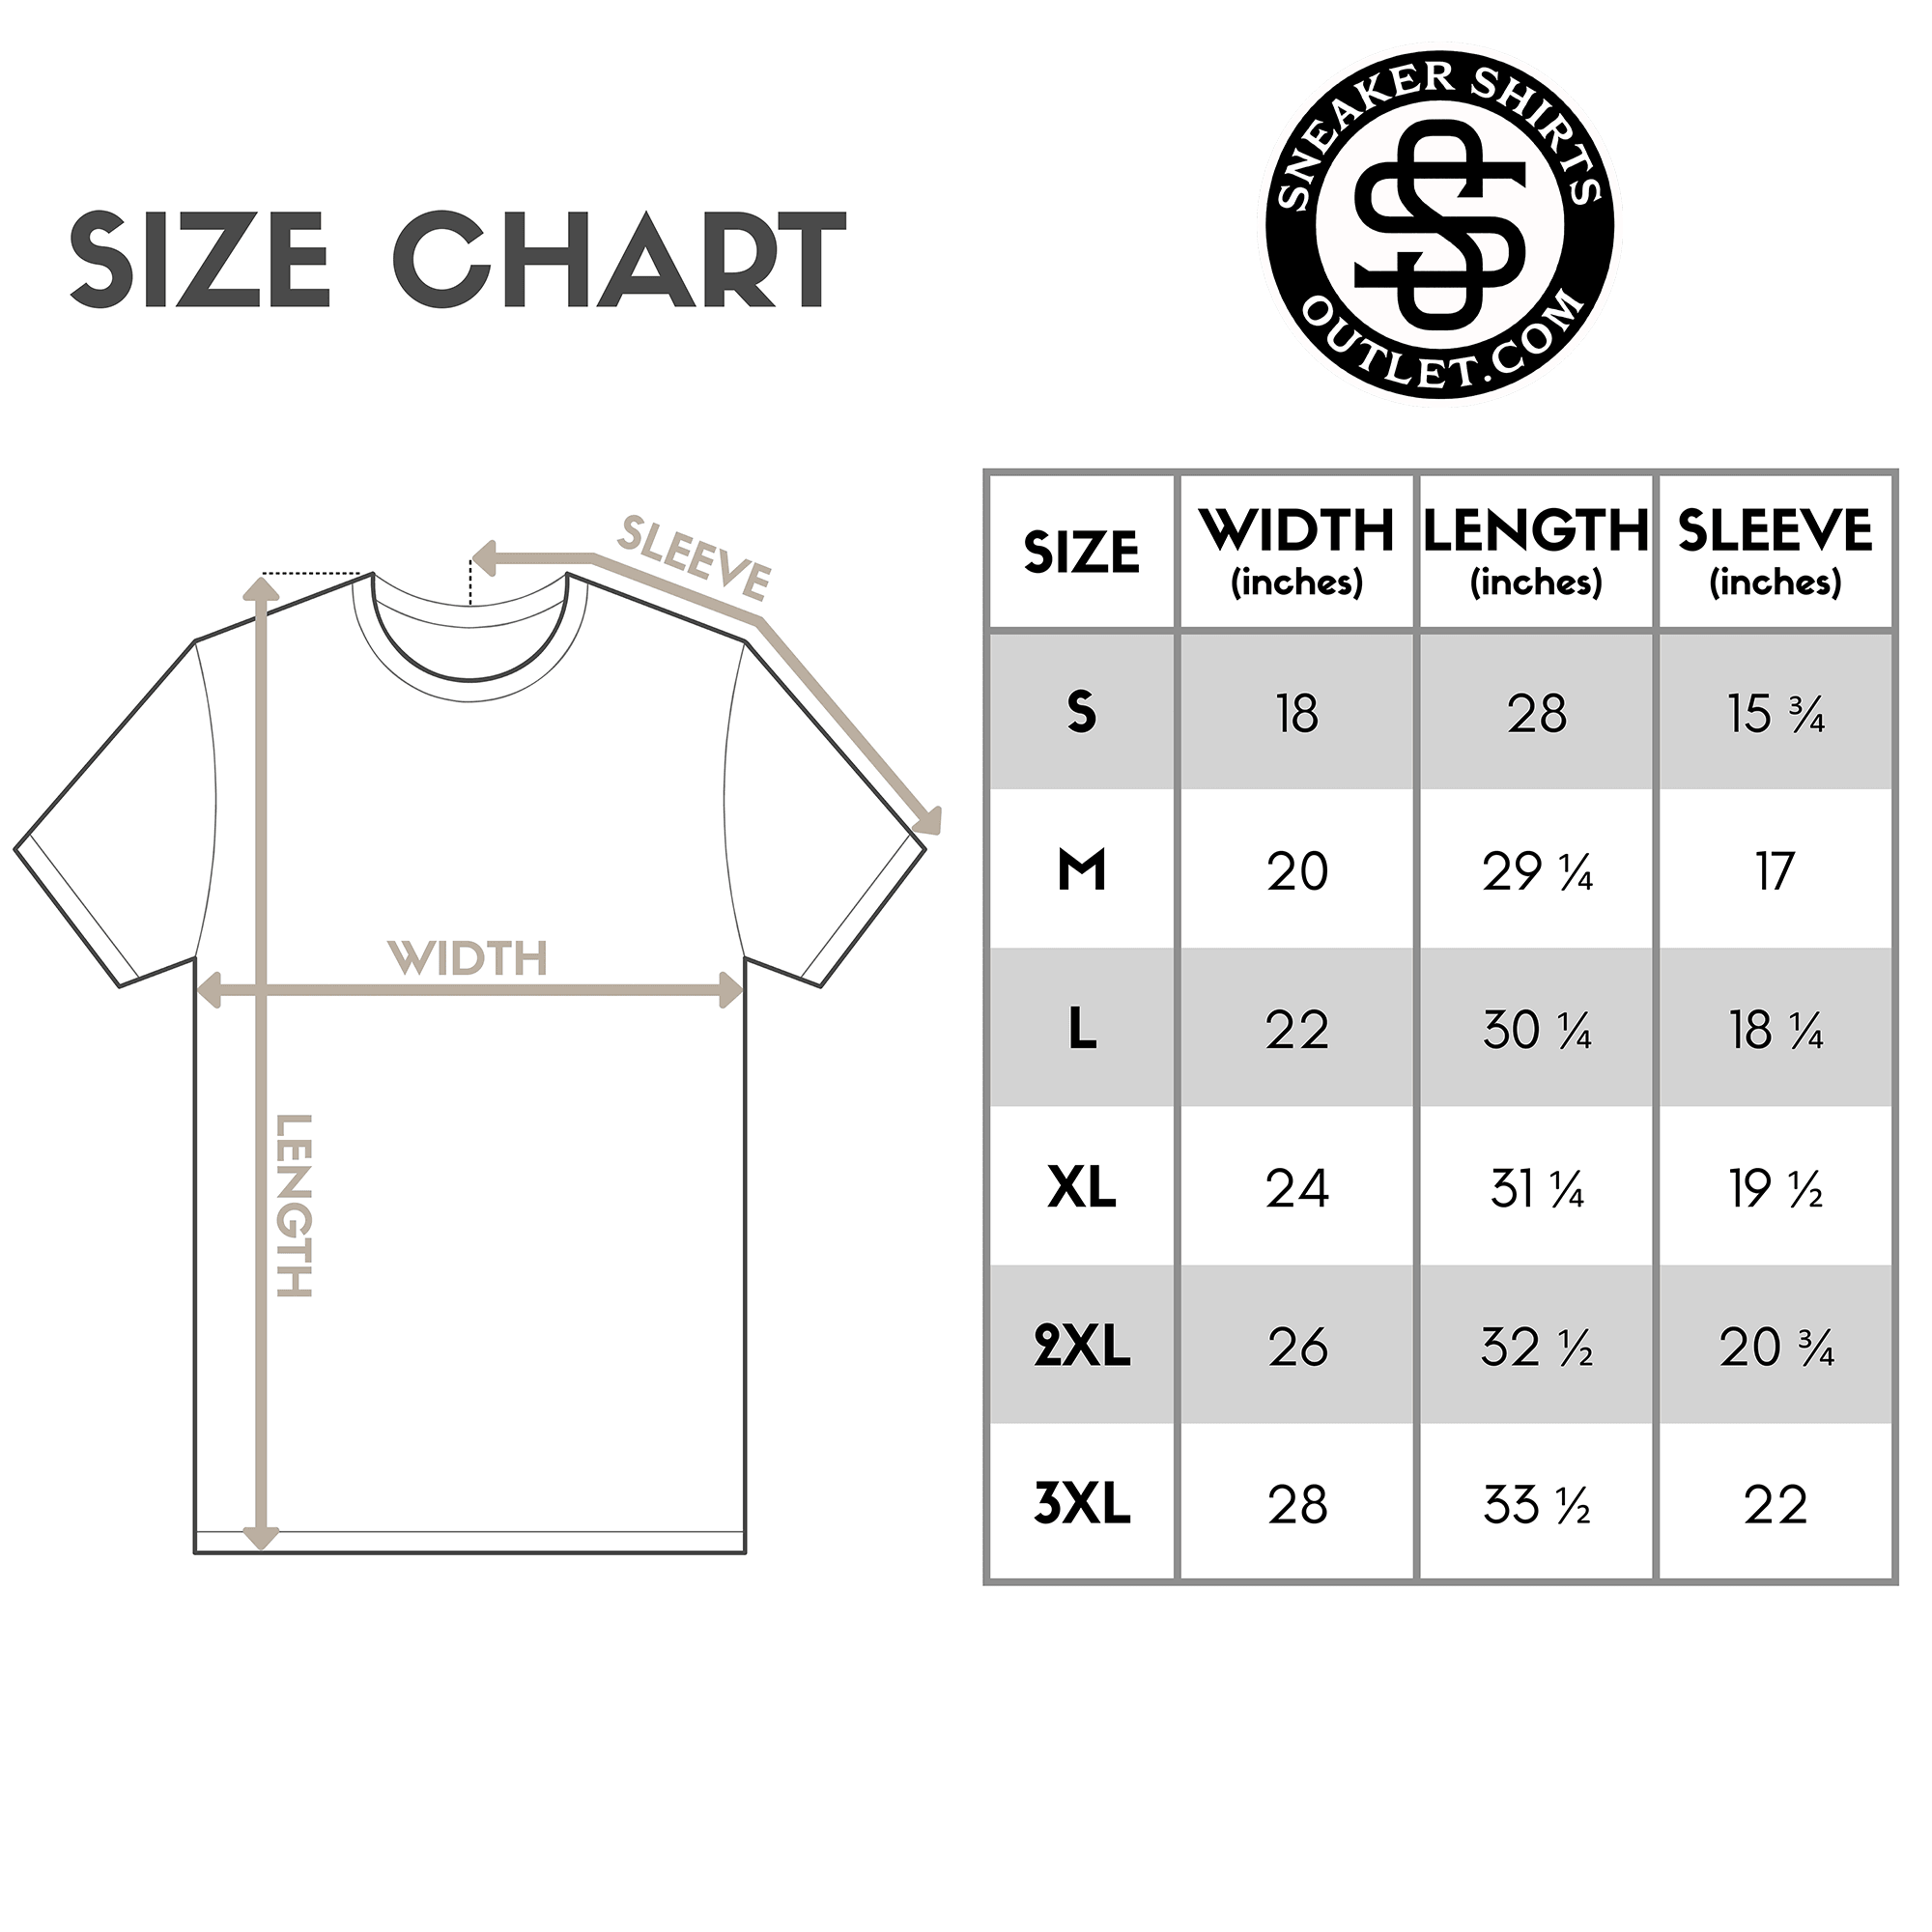 size chart Rags to Riches Shirt Yeezy Boost 700s Bright Blue photo